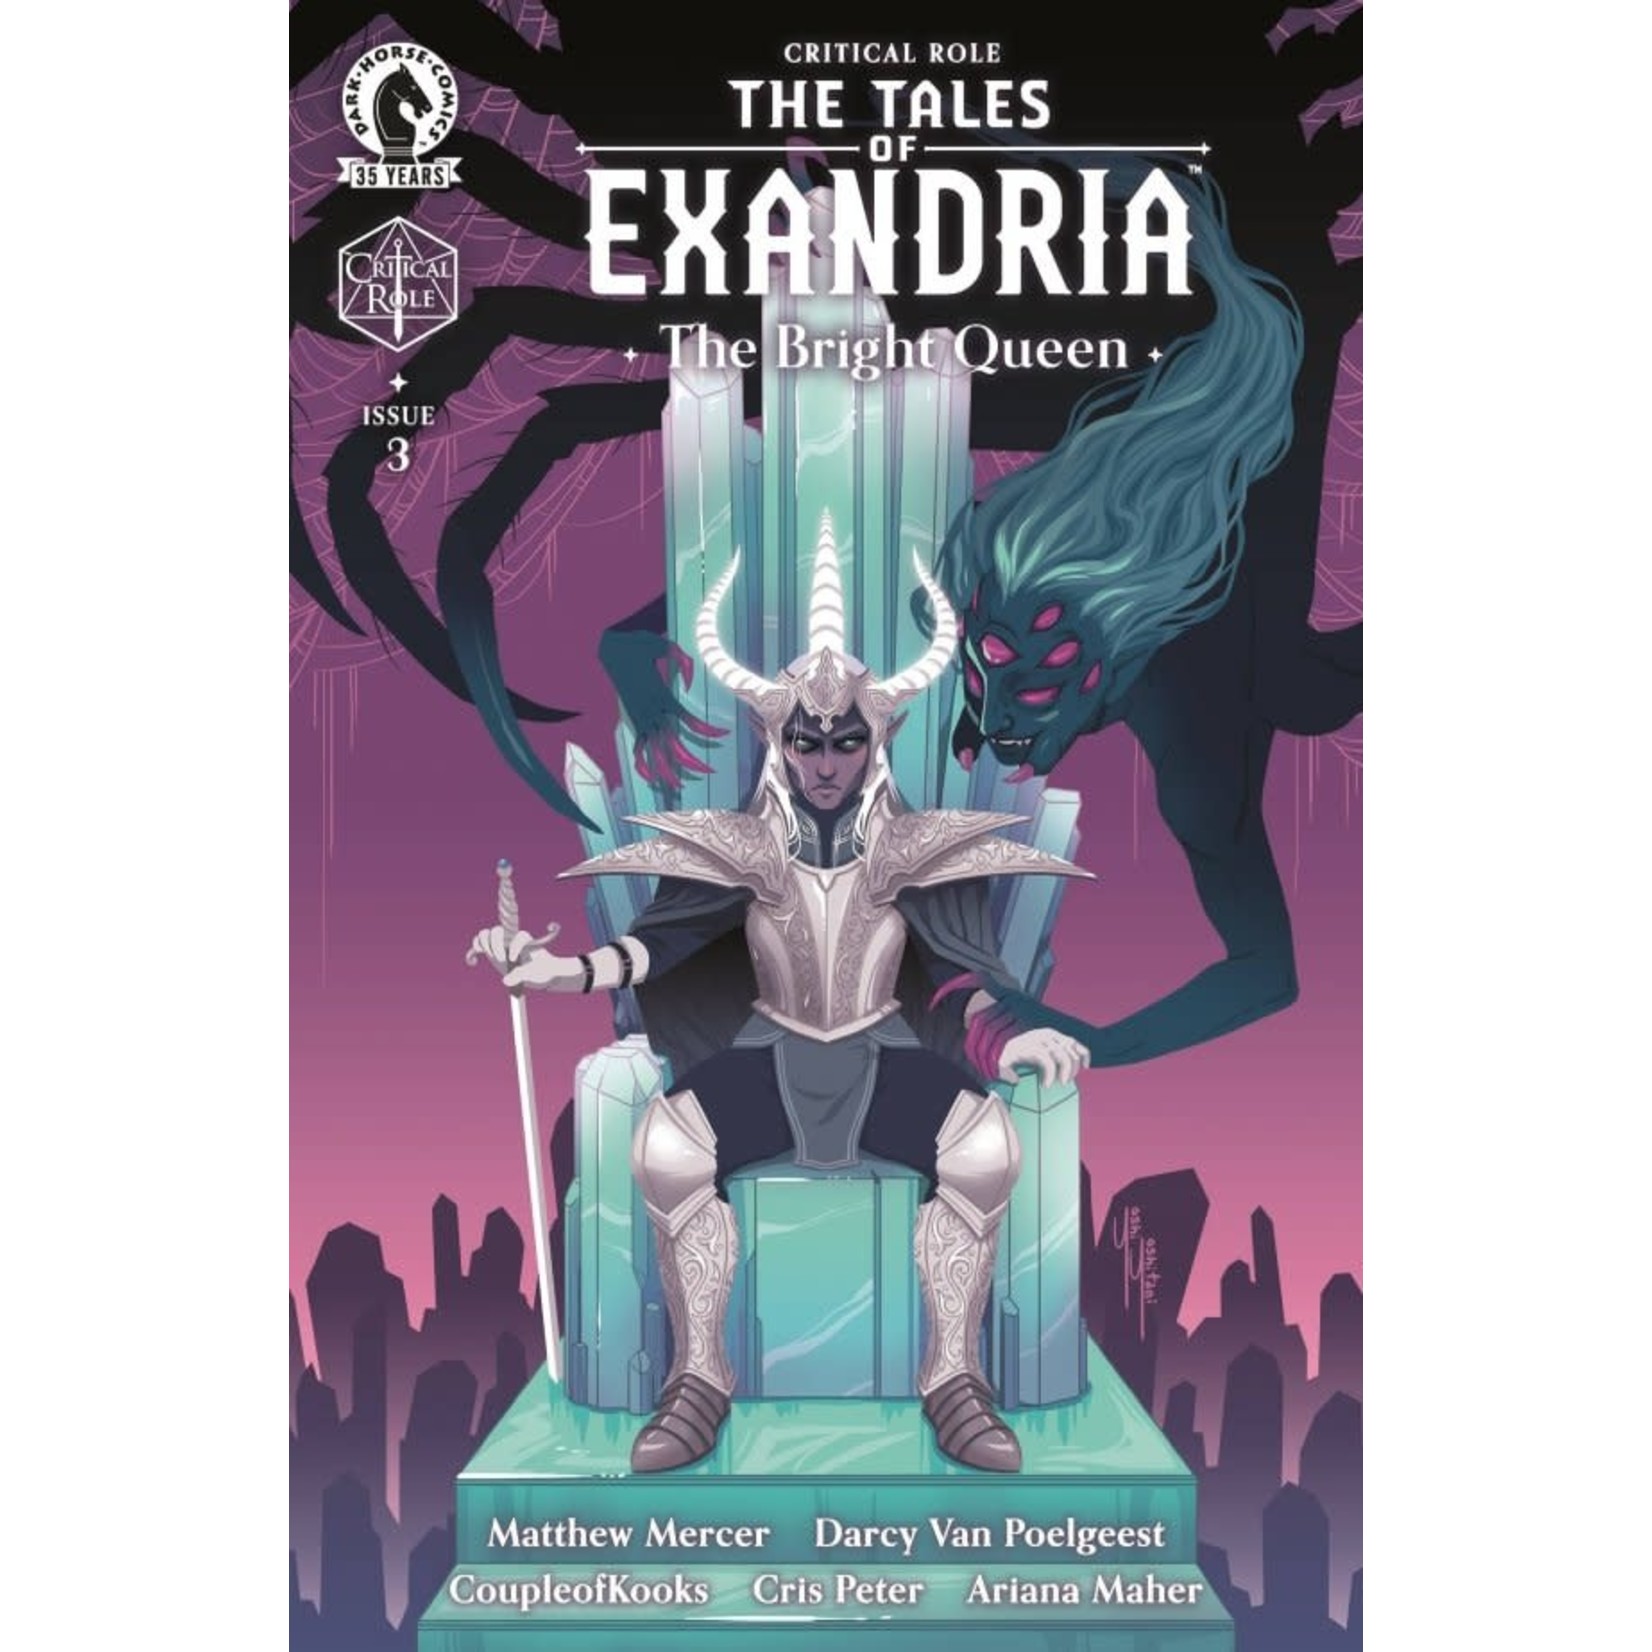 1-Darkhorse Critical Role: The Tales of Exandria The Bright Queen #3